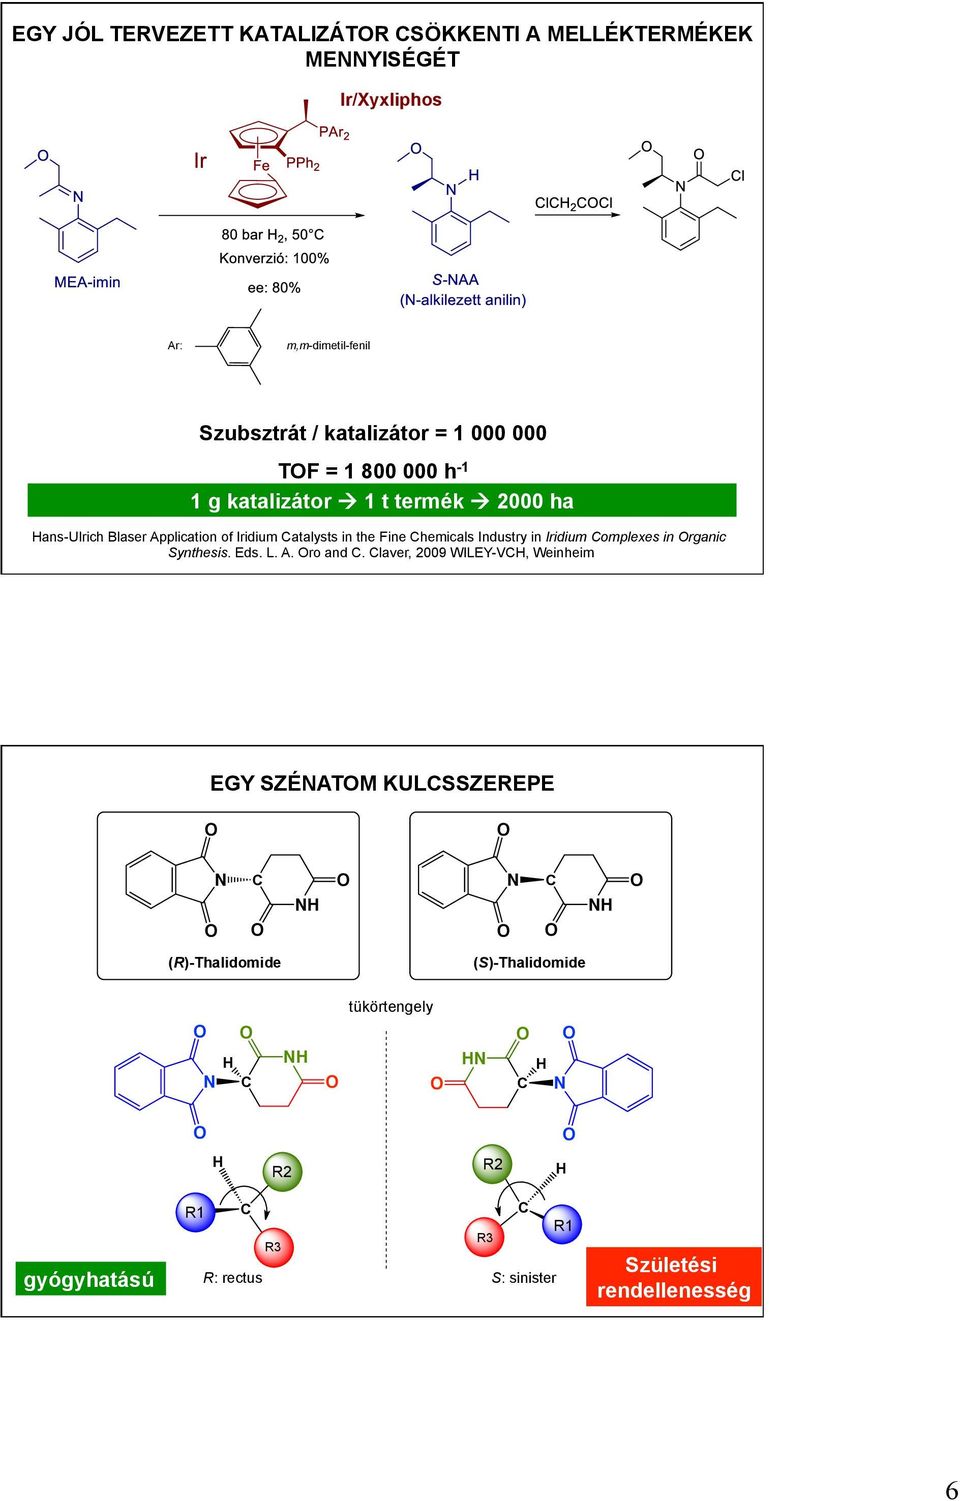 hemicals Industry in Iridium omplexes in rganic Synthesis. Eds. L. A. ro and.